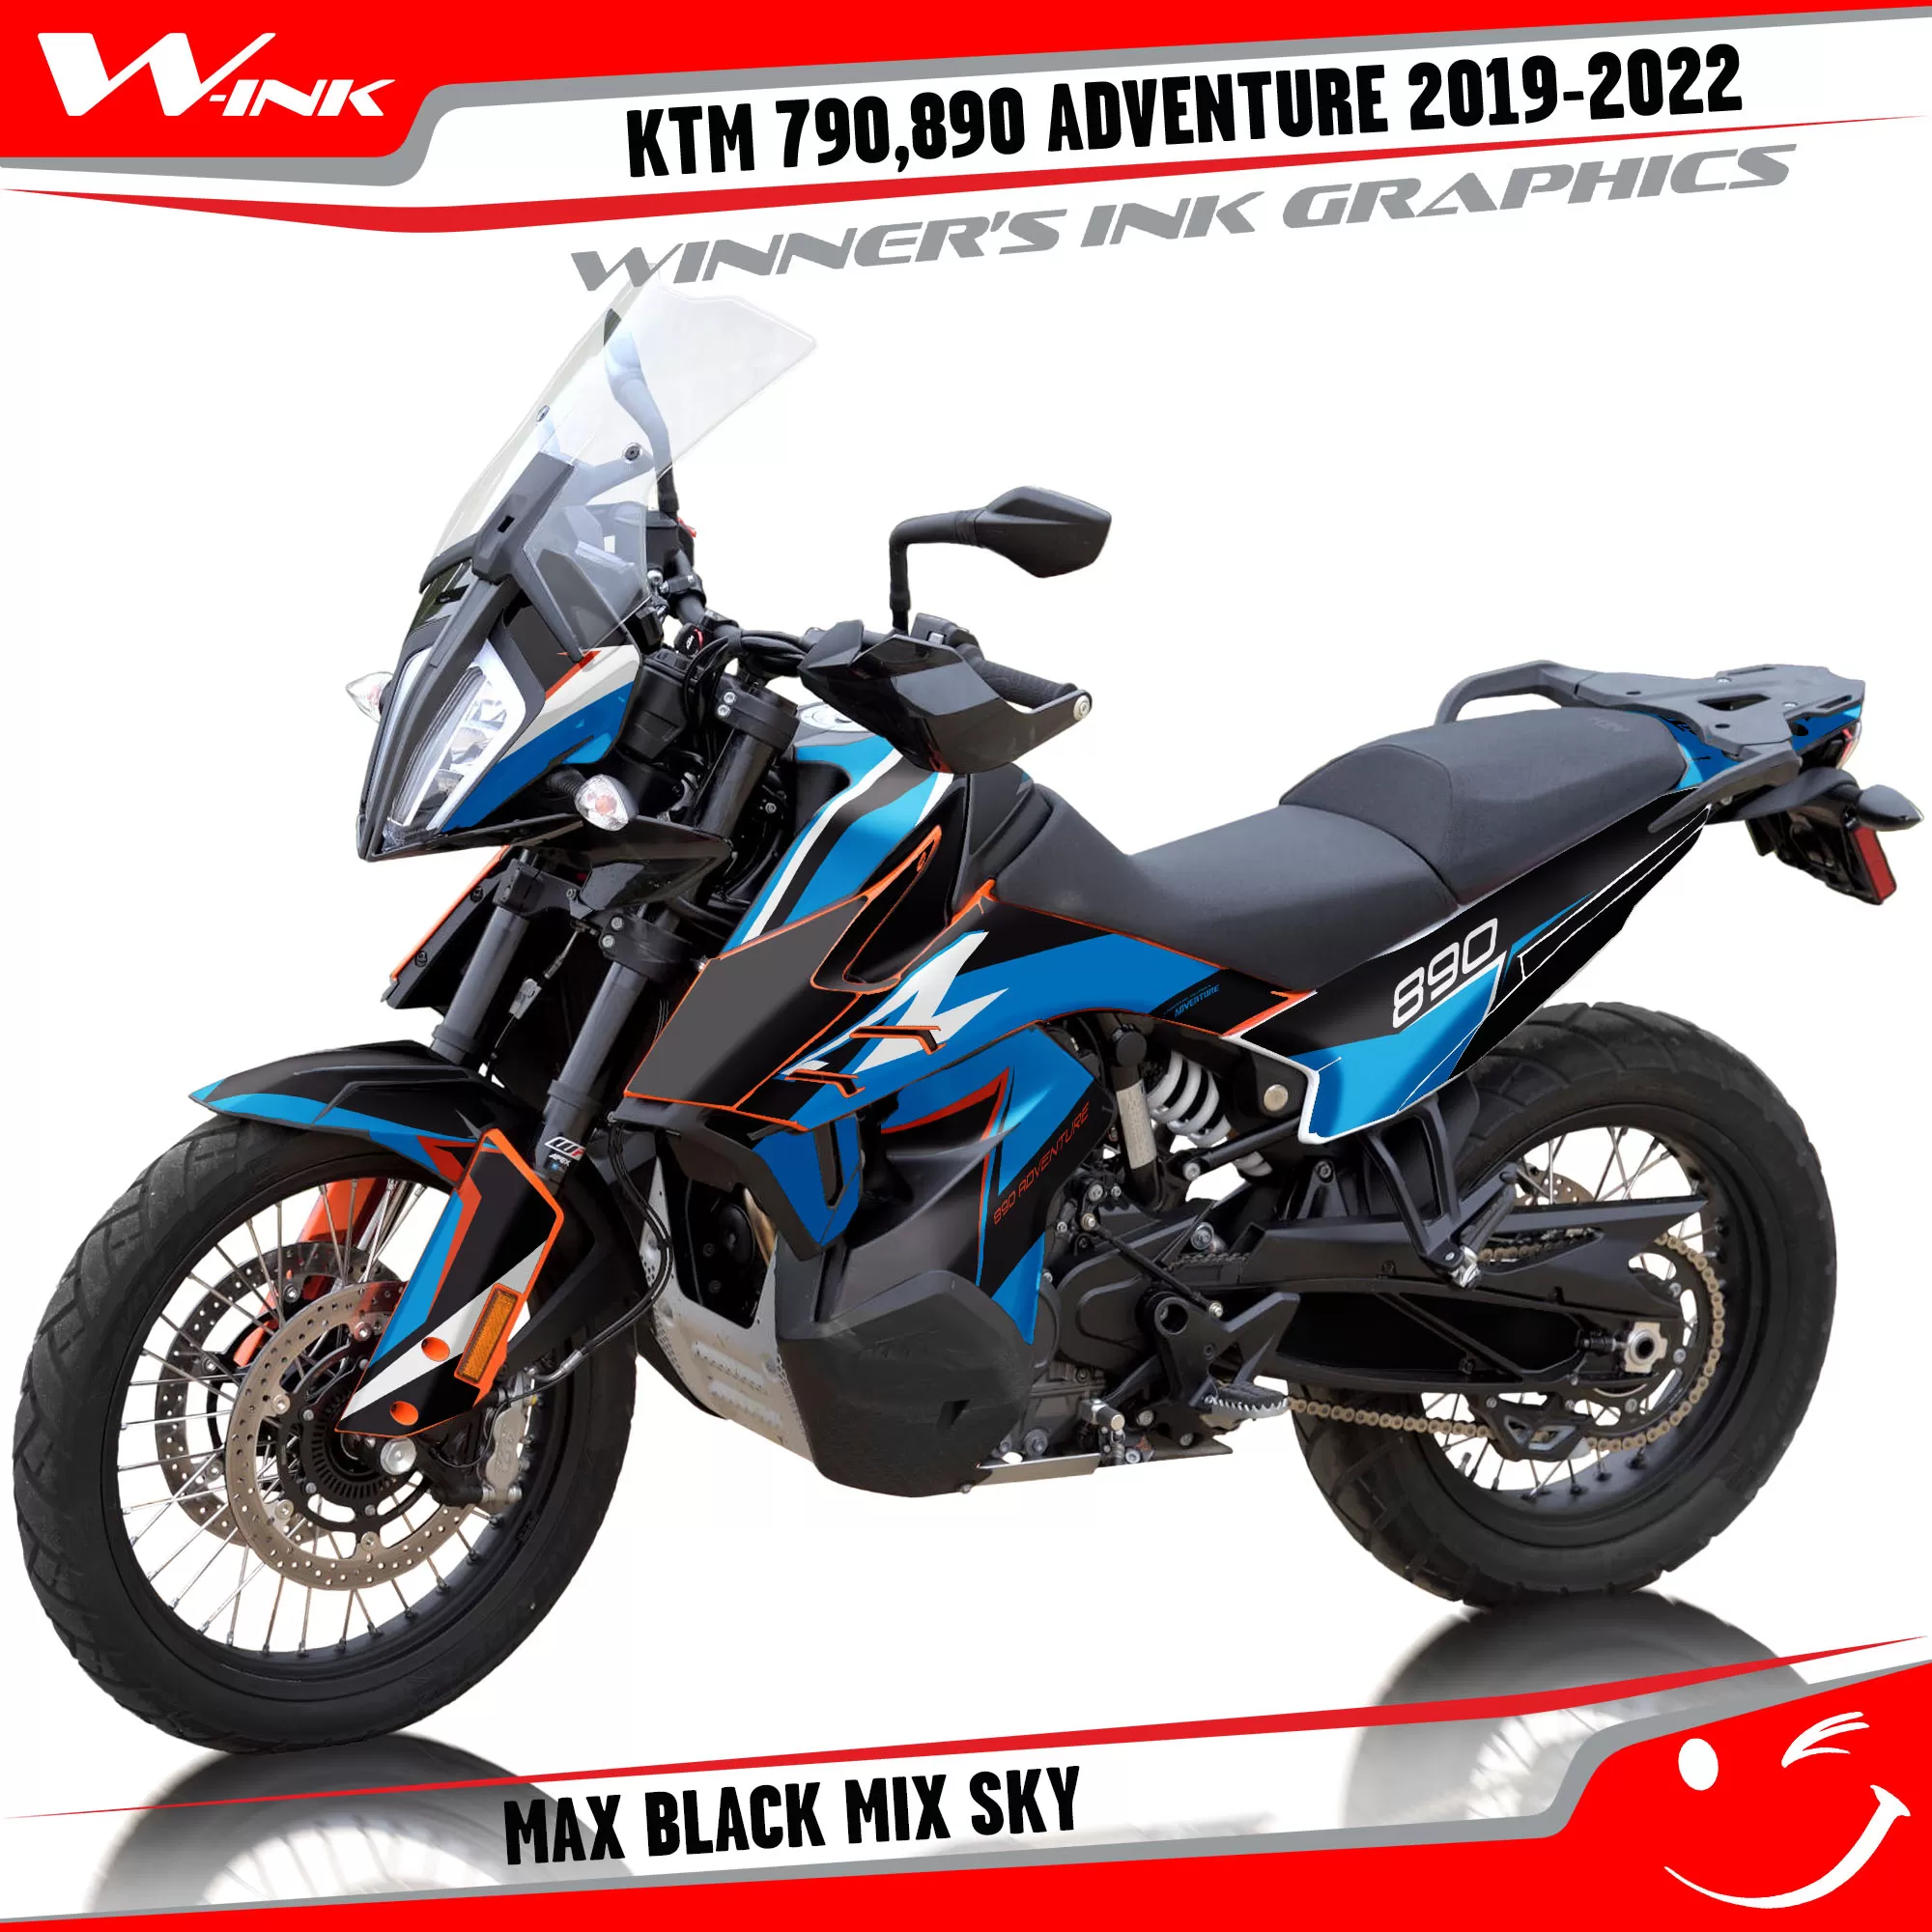 Adventure-790-890-2019-2020-2021-2022-graphics-kit-and-decals-with-designs-Max-Black-Mix-Sky